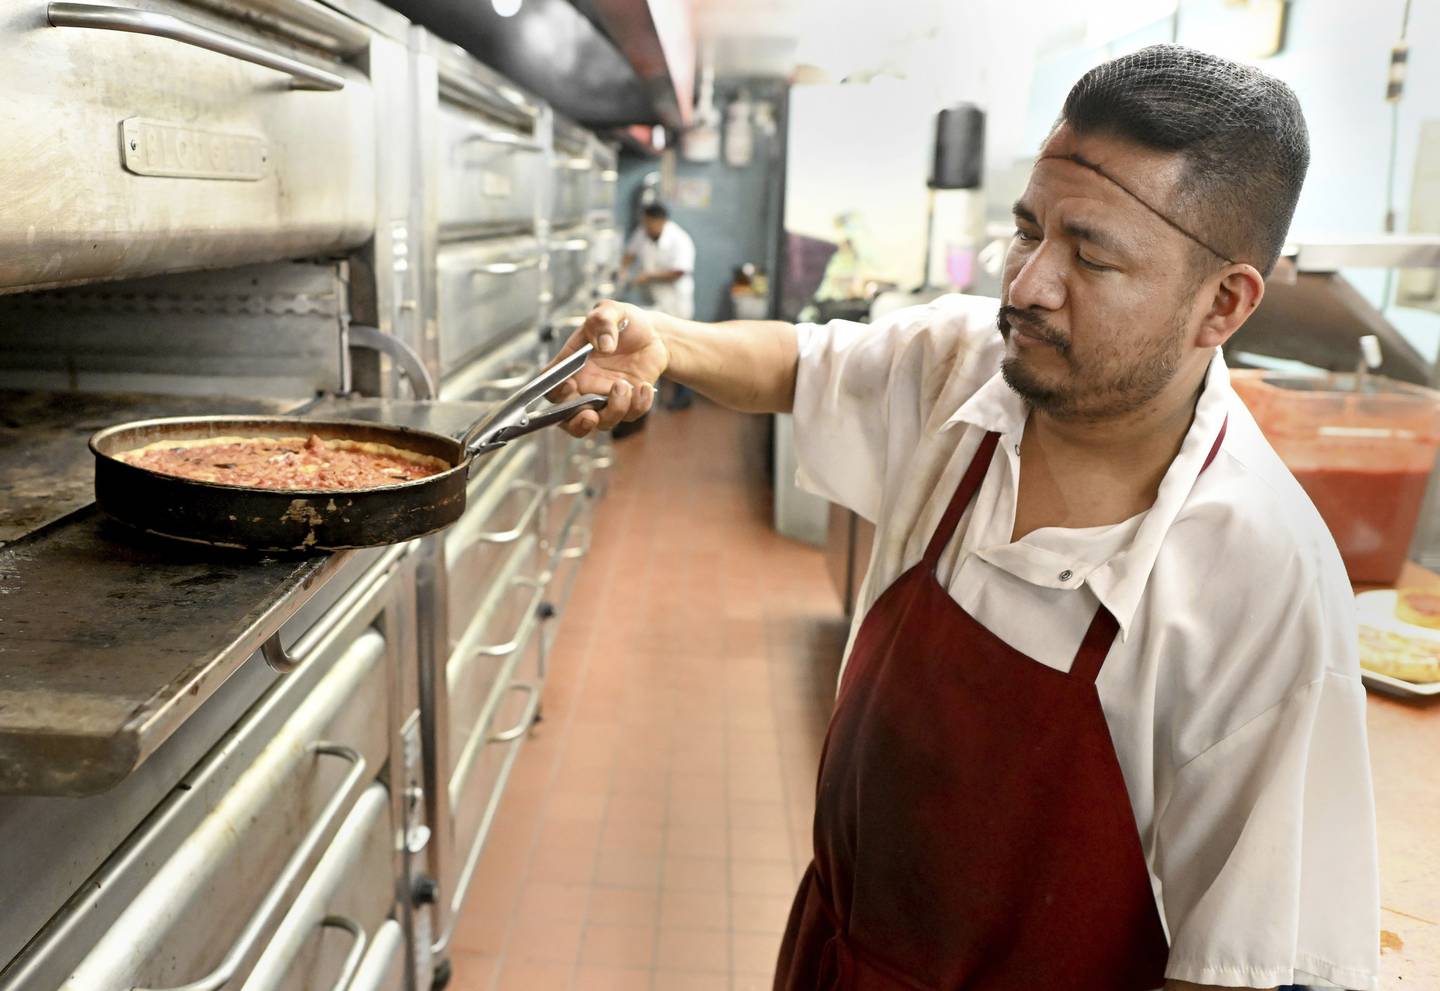 Martin San Agustin works as a line cook at the Lou Malnati’s restaurant in Buffalo Grove on Sept. 19, 2022.